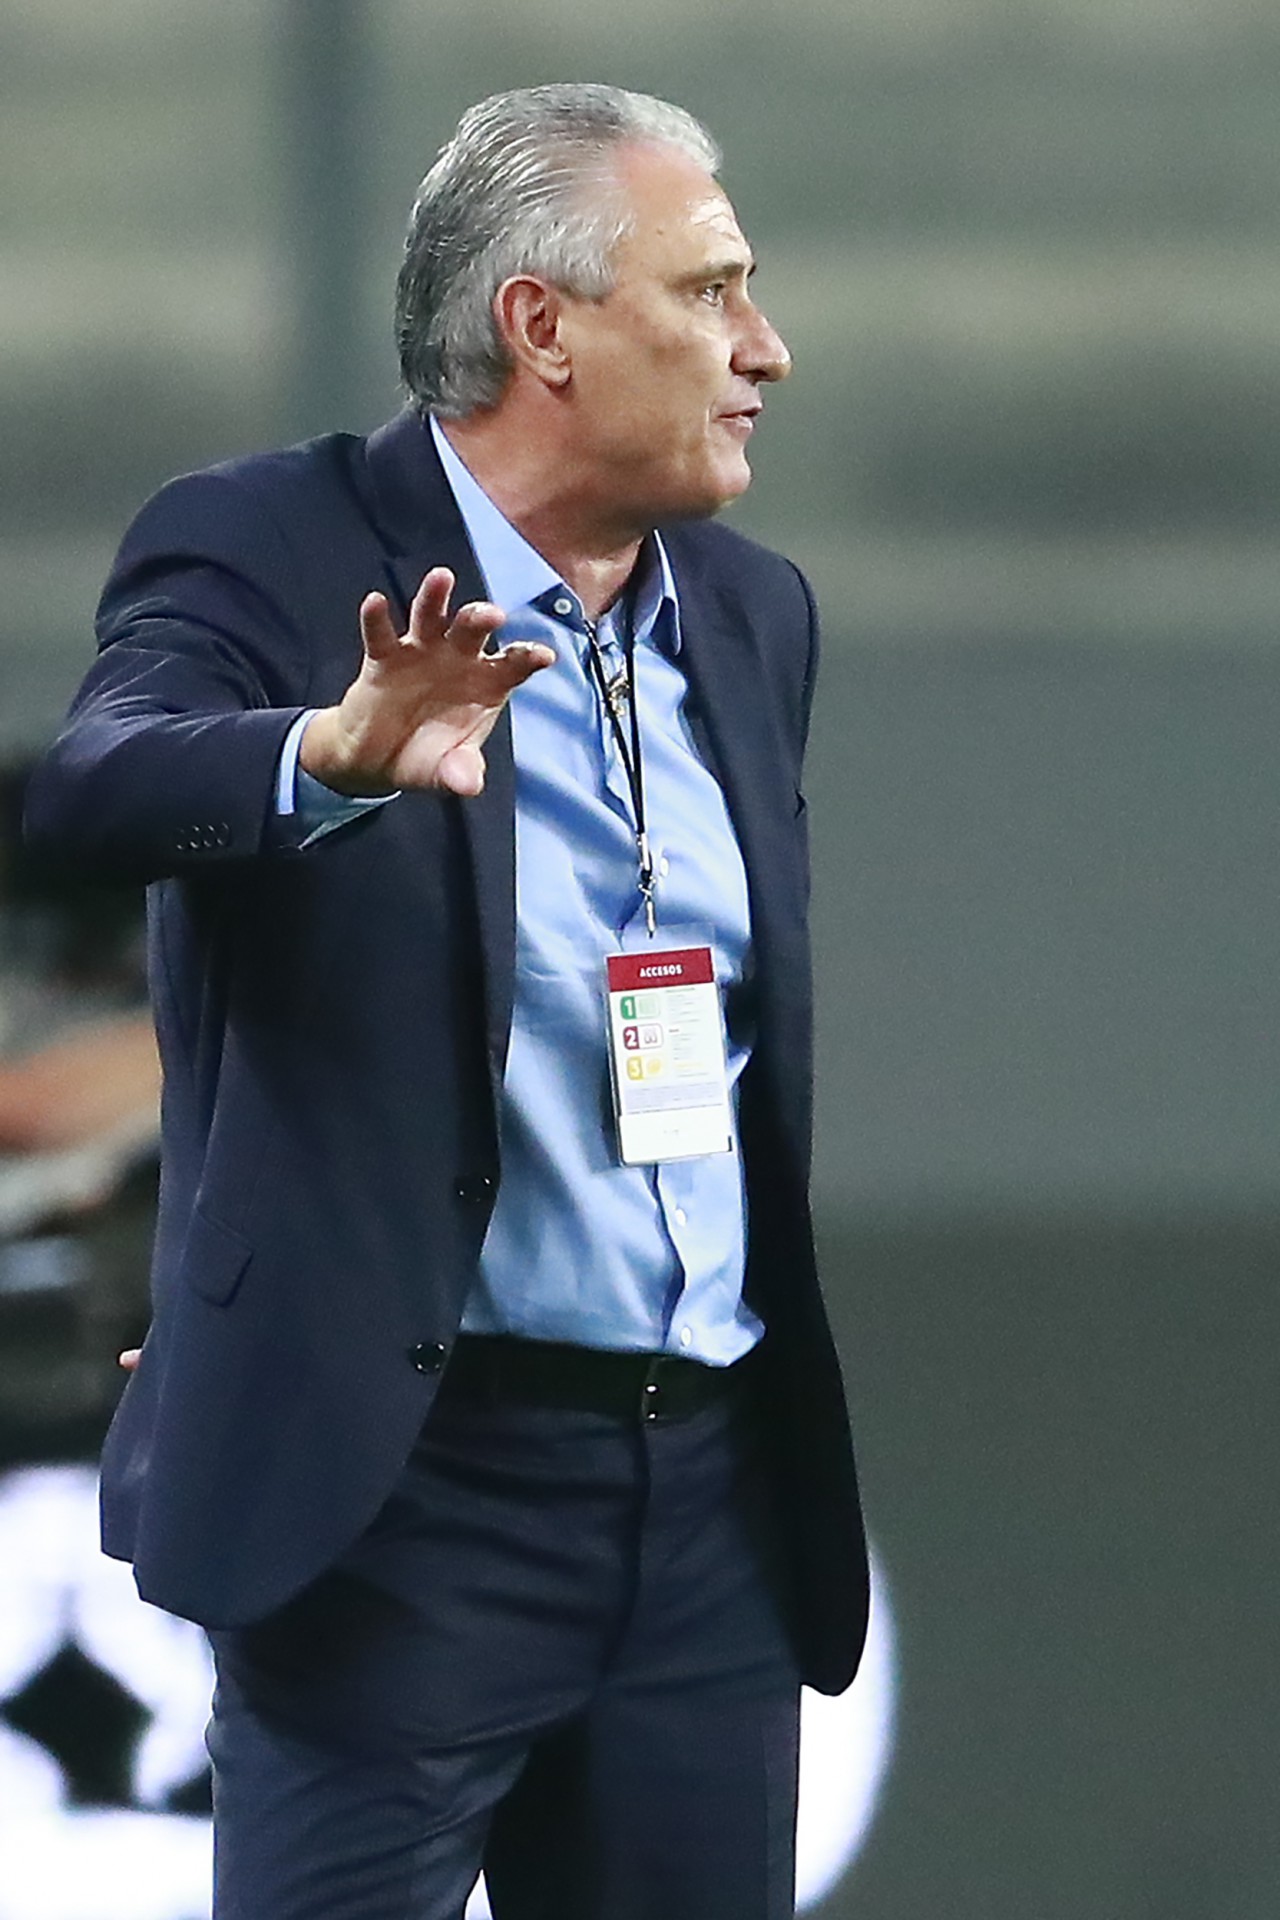 Brazil's coach Tite gives instructions during the 2022 FIFA World Cup South American qualifier football match against Peru at the National Stadium in Lima, on October 13, 2020, amid the COVID-19 novel coronavirus pandemic. (Photo by Daniel APUY / POOL / AFP) - AFP